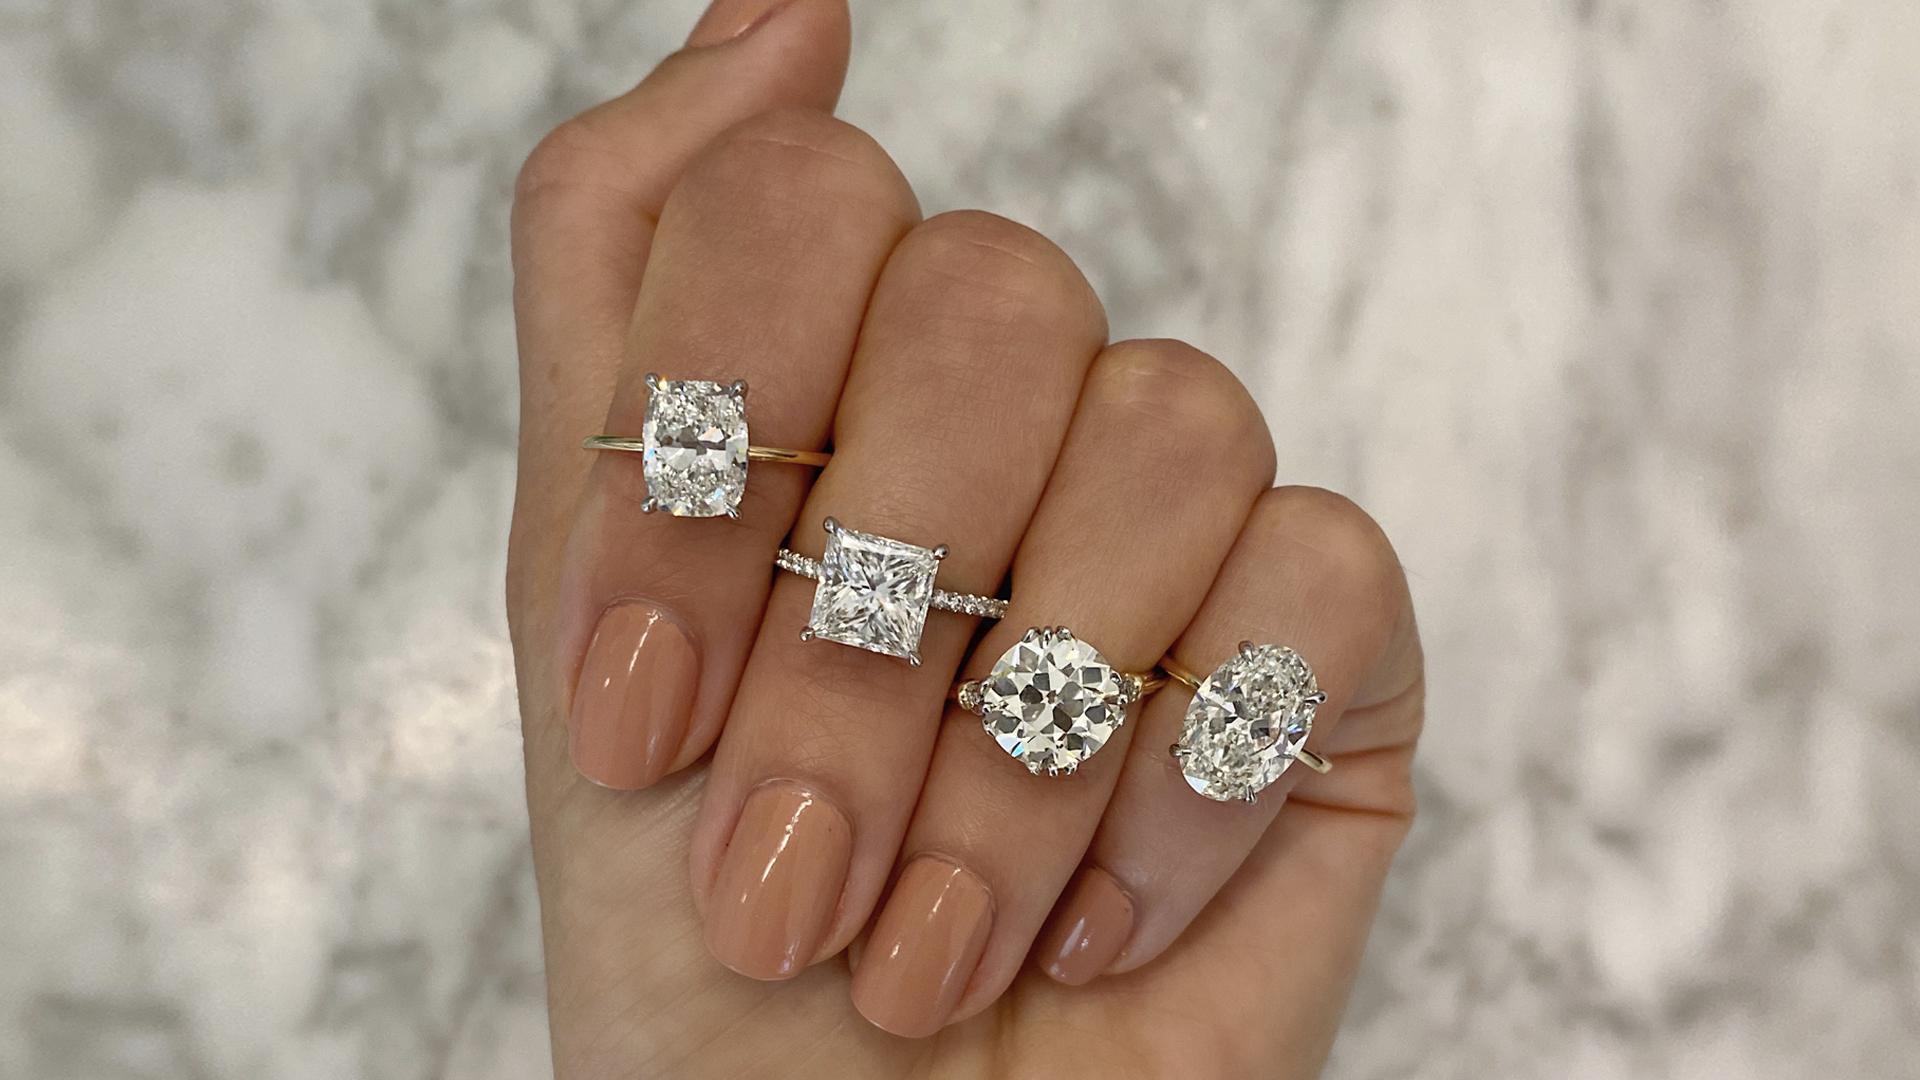 How To Choose The Correct Engagement Ring